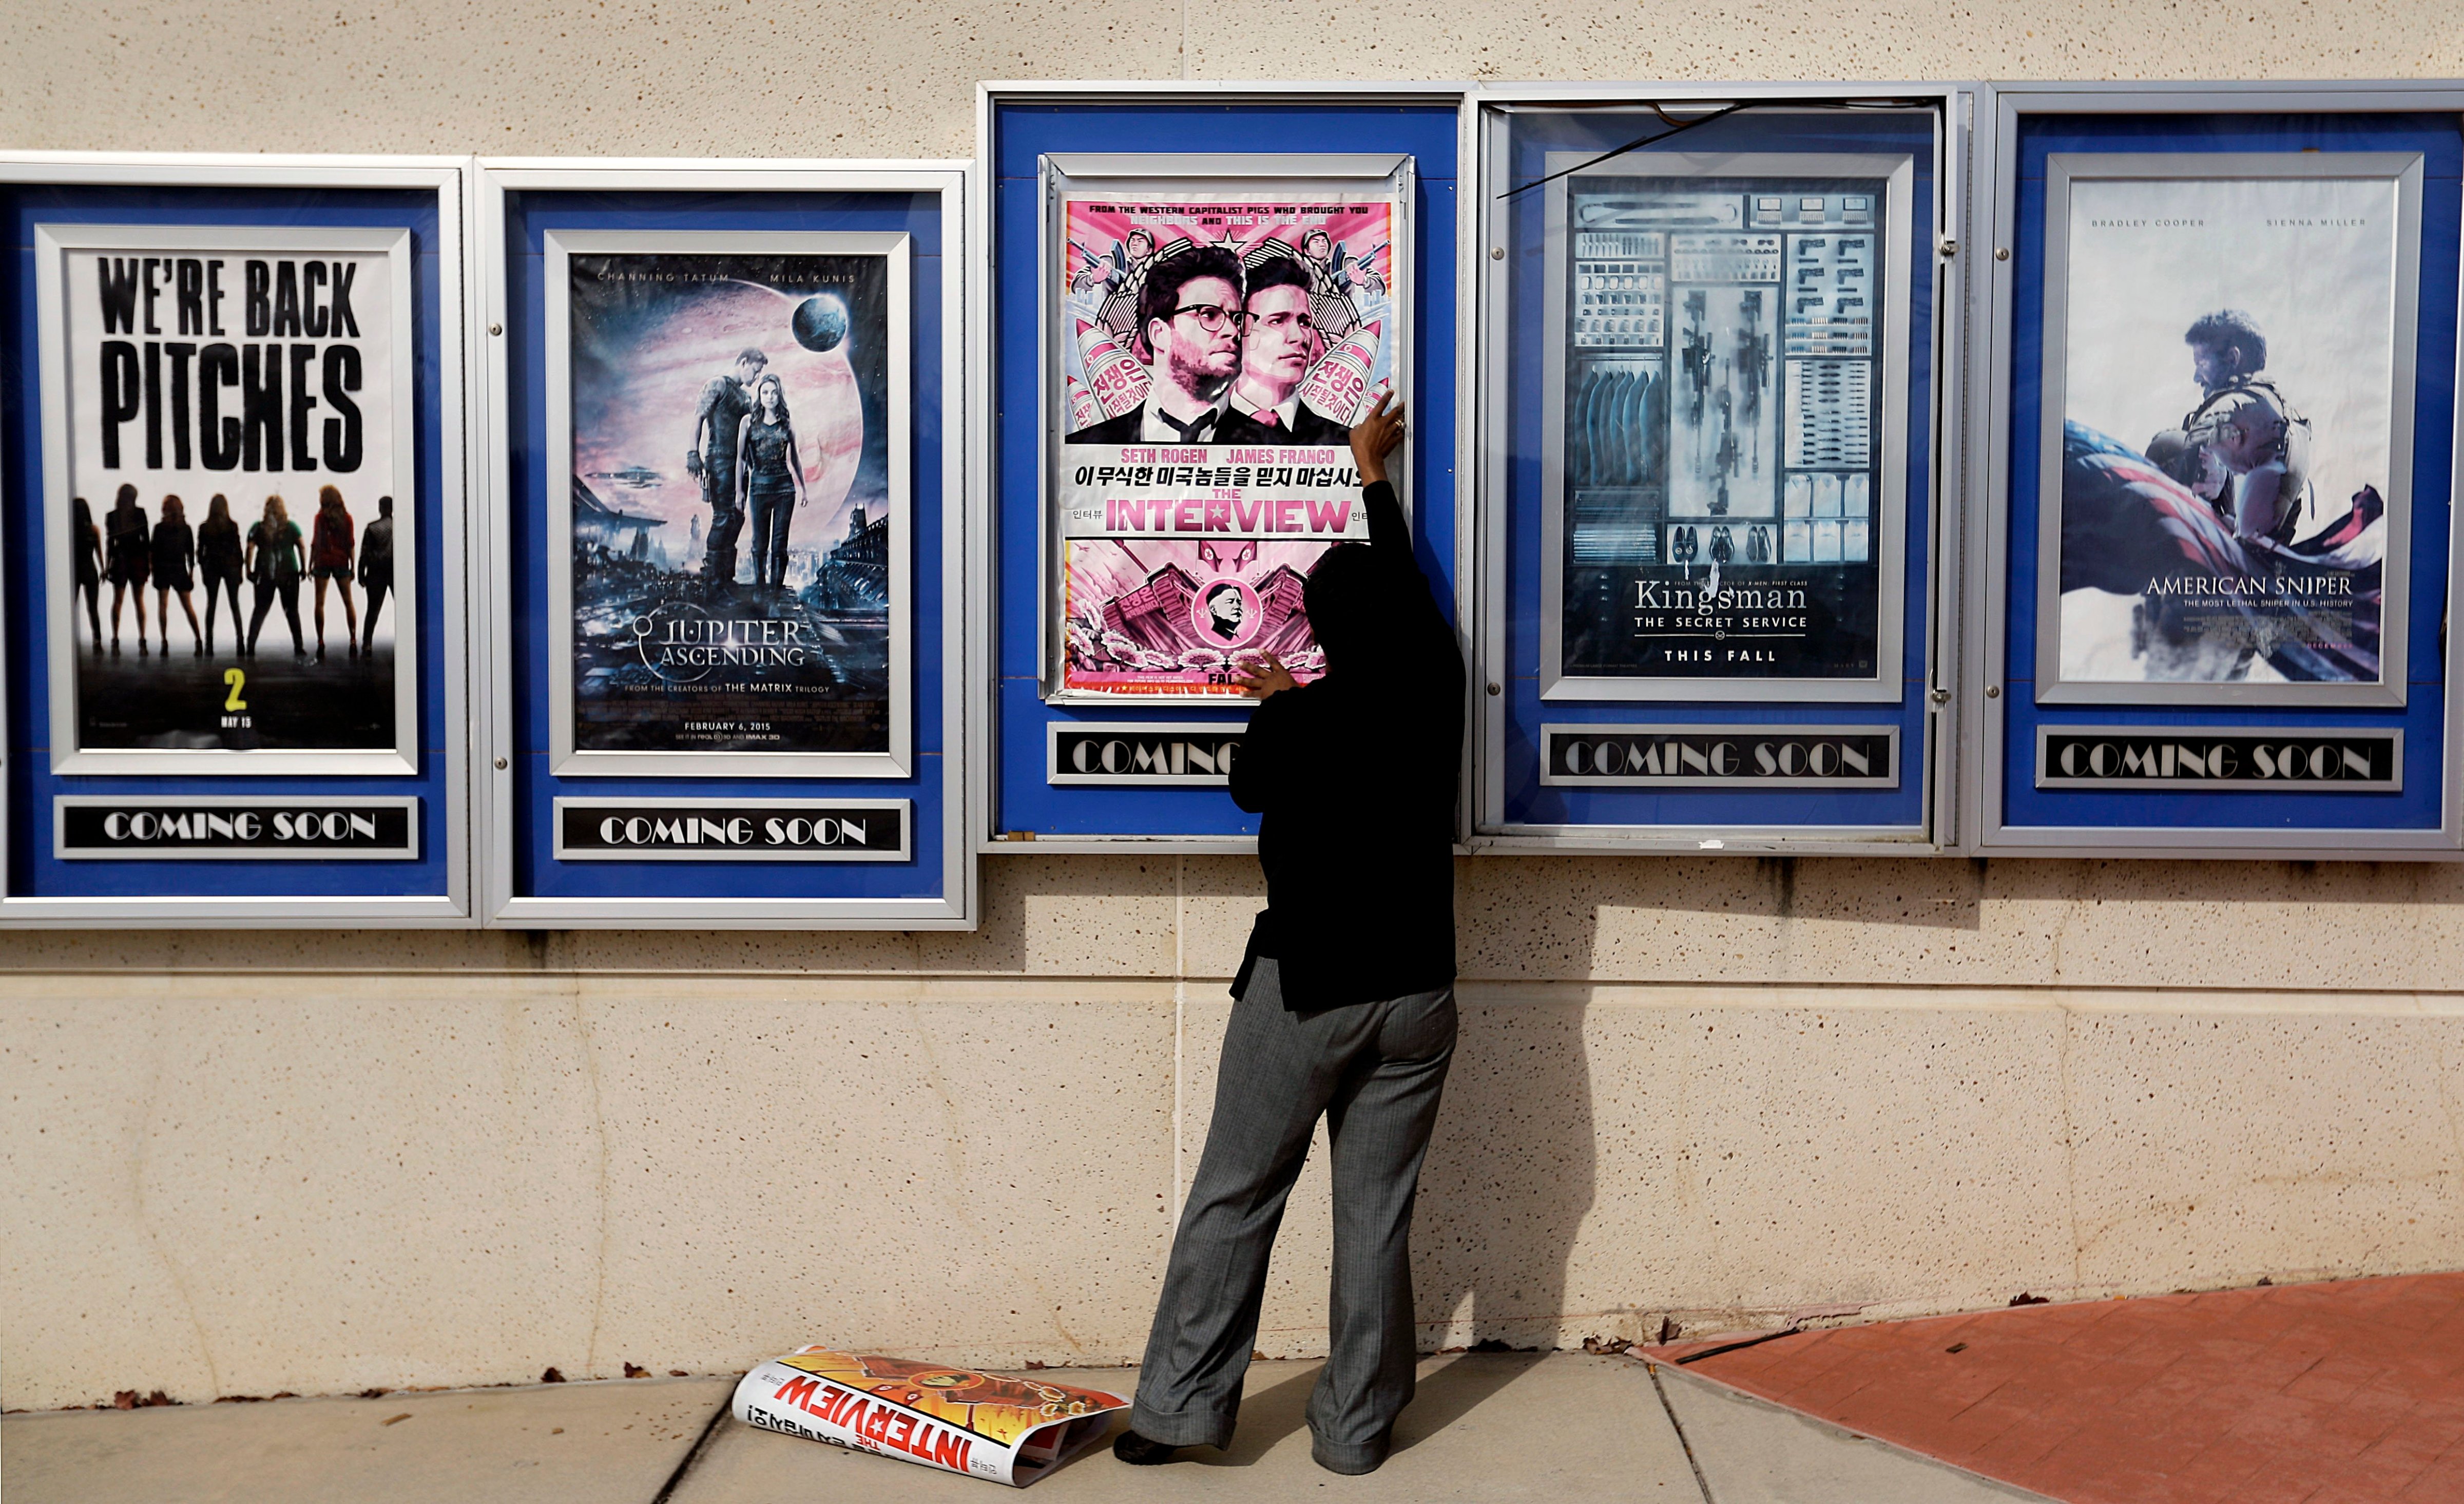 A poster for the movie "The Interview" is taken down by a worker after being pulled from a display case at a Carmike Cinemas movie theater, Wednesday, Dec. 17, 2014, in Atlanta.